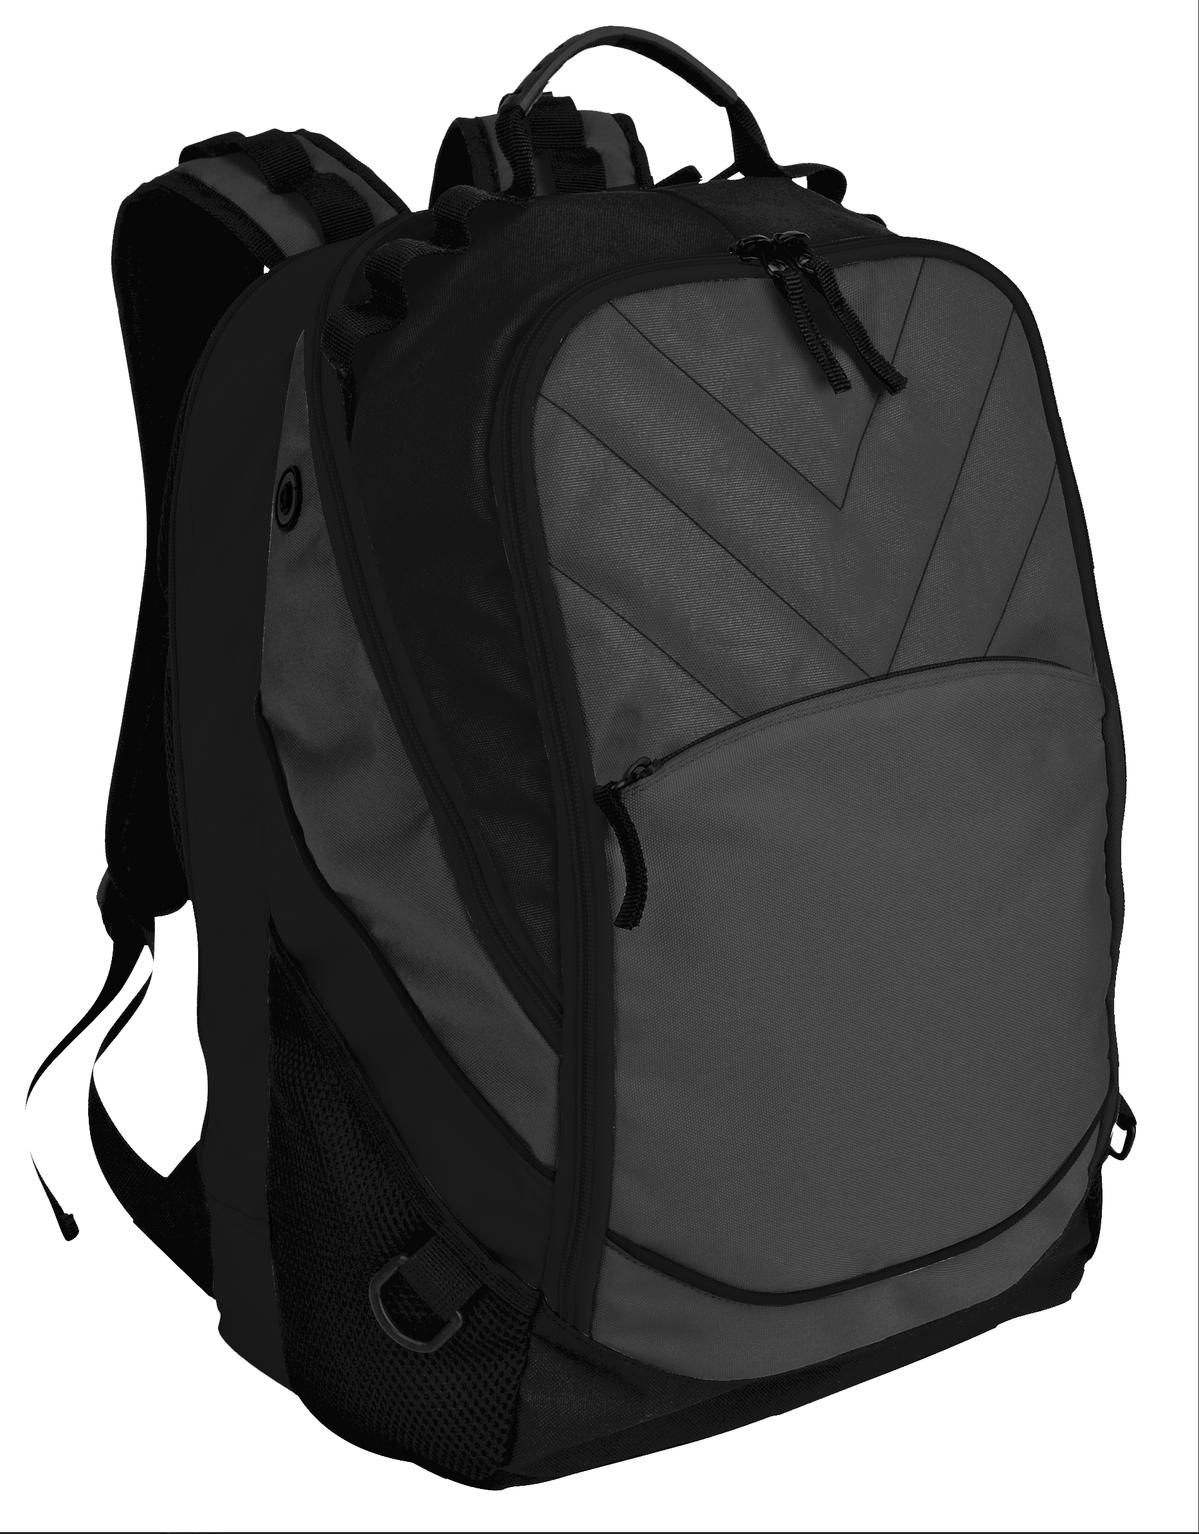 Comfortable Computer Backpack - image 1 of 1